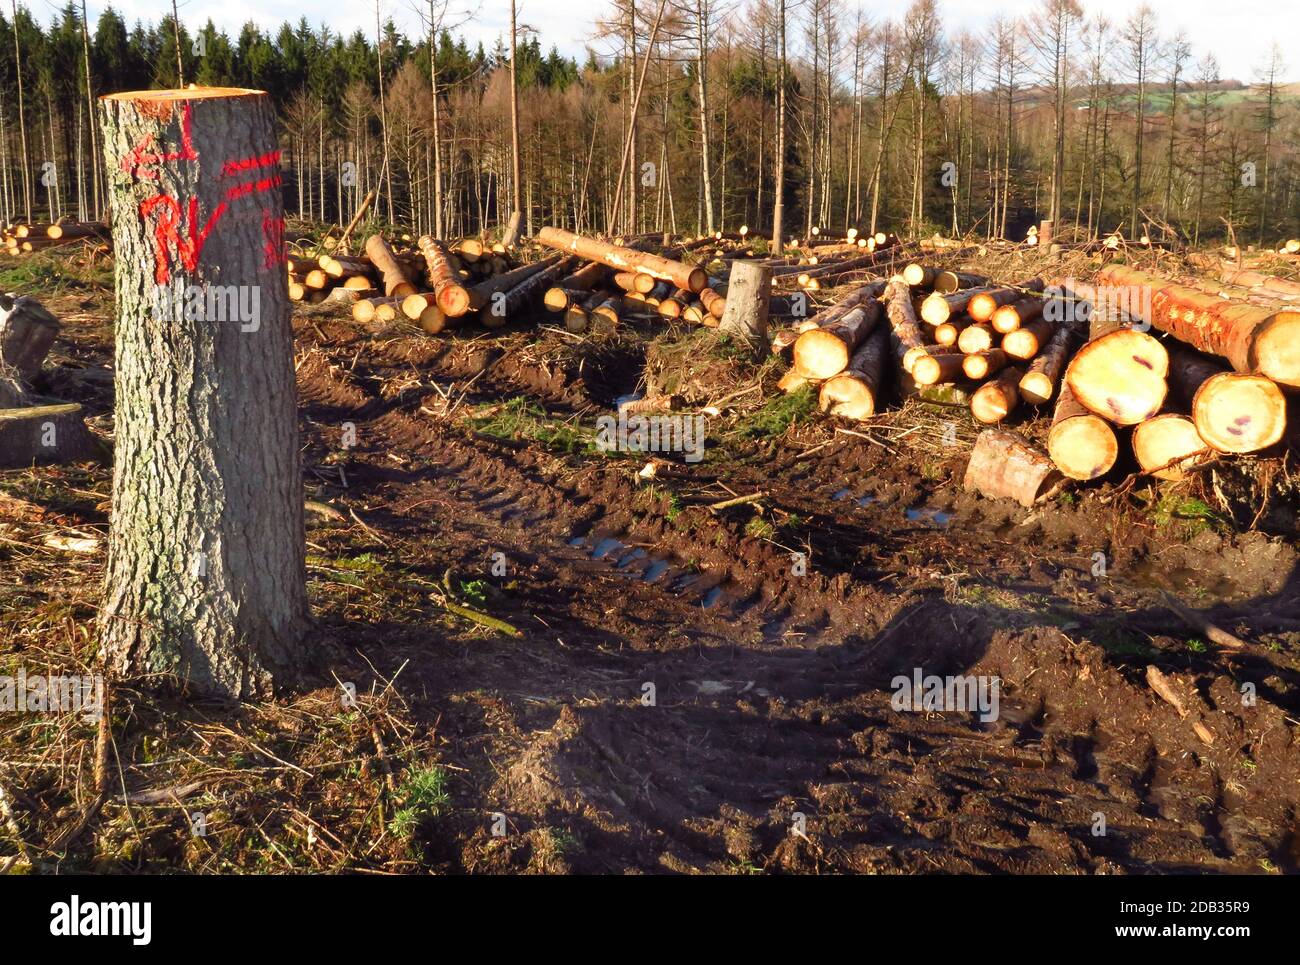 Clearcutting, deforestation, sawed off spruces, stubs and logs after bark beetle infestation Stock Photo